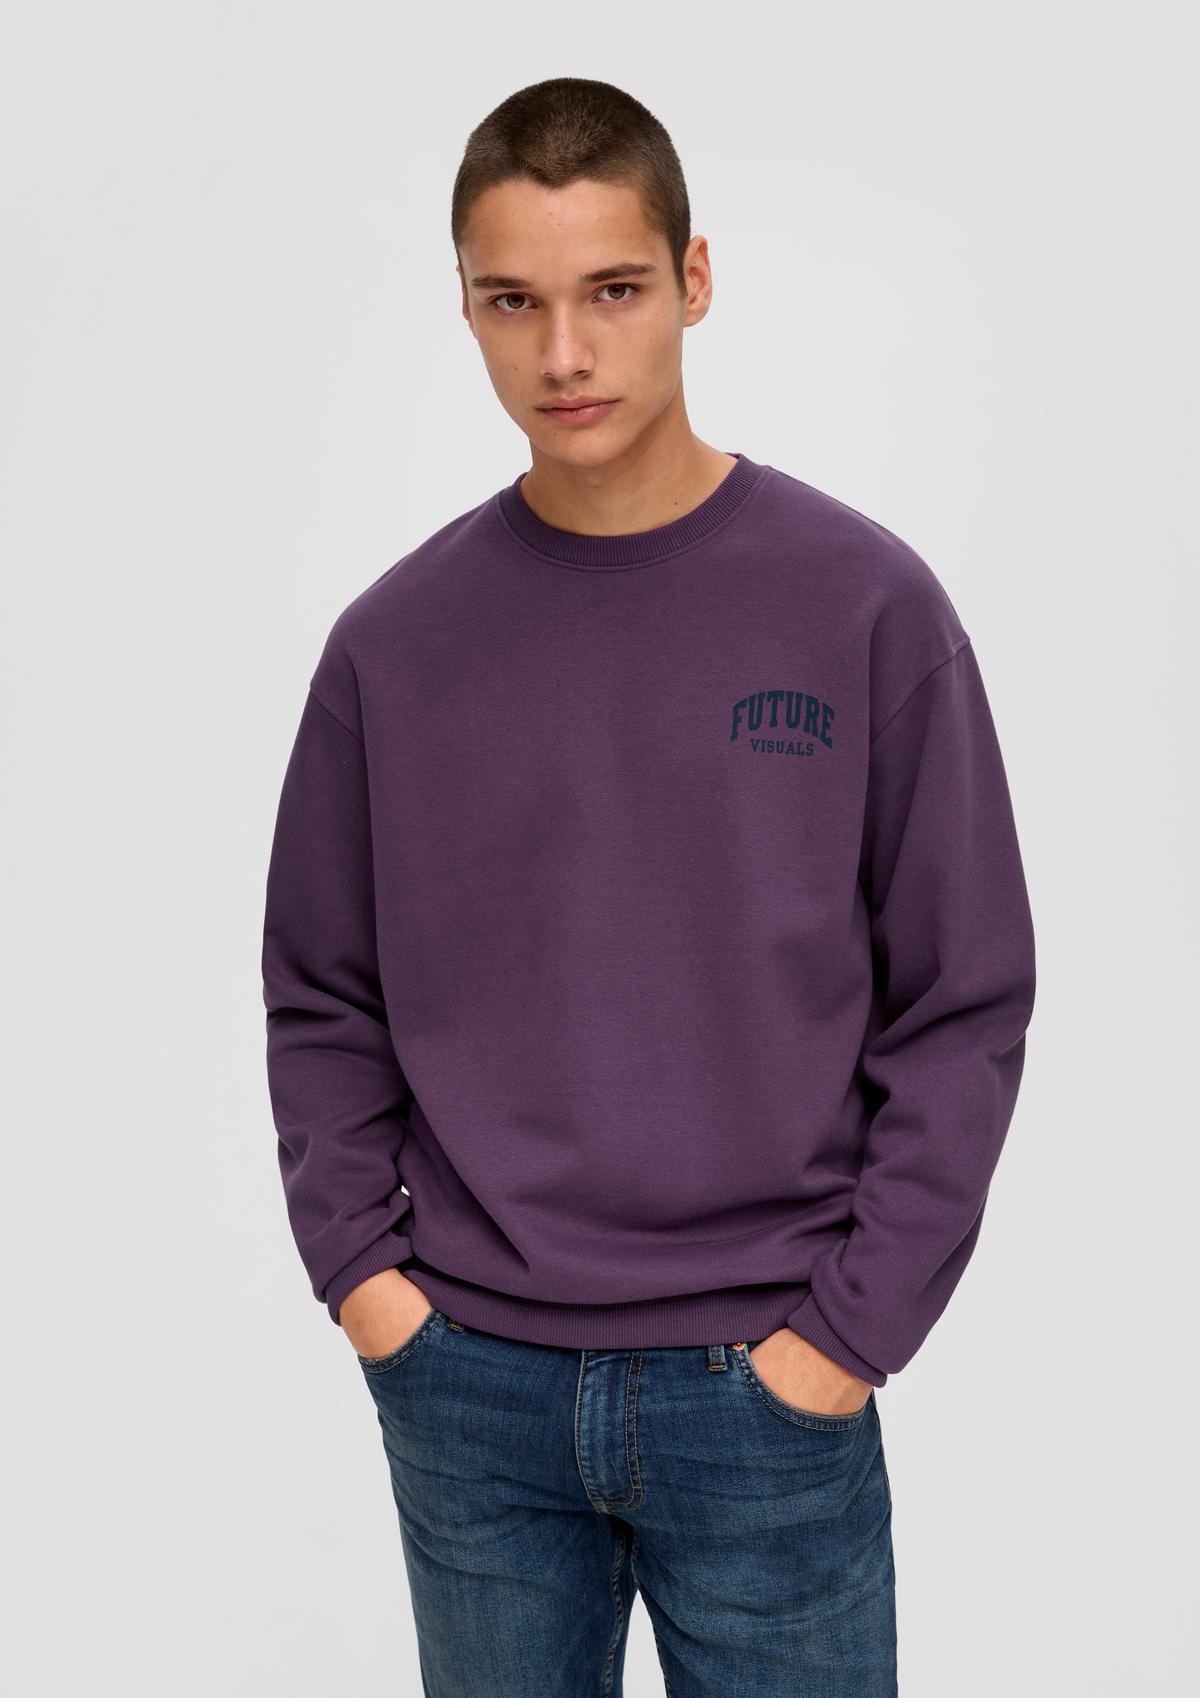 s.Oliver Sweatshirt with a large back print